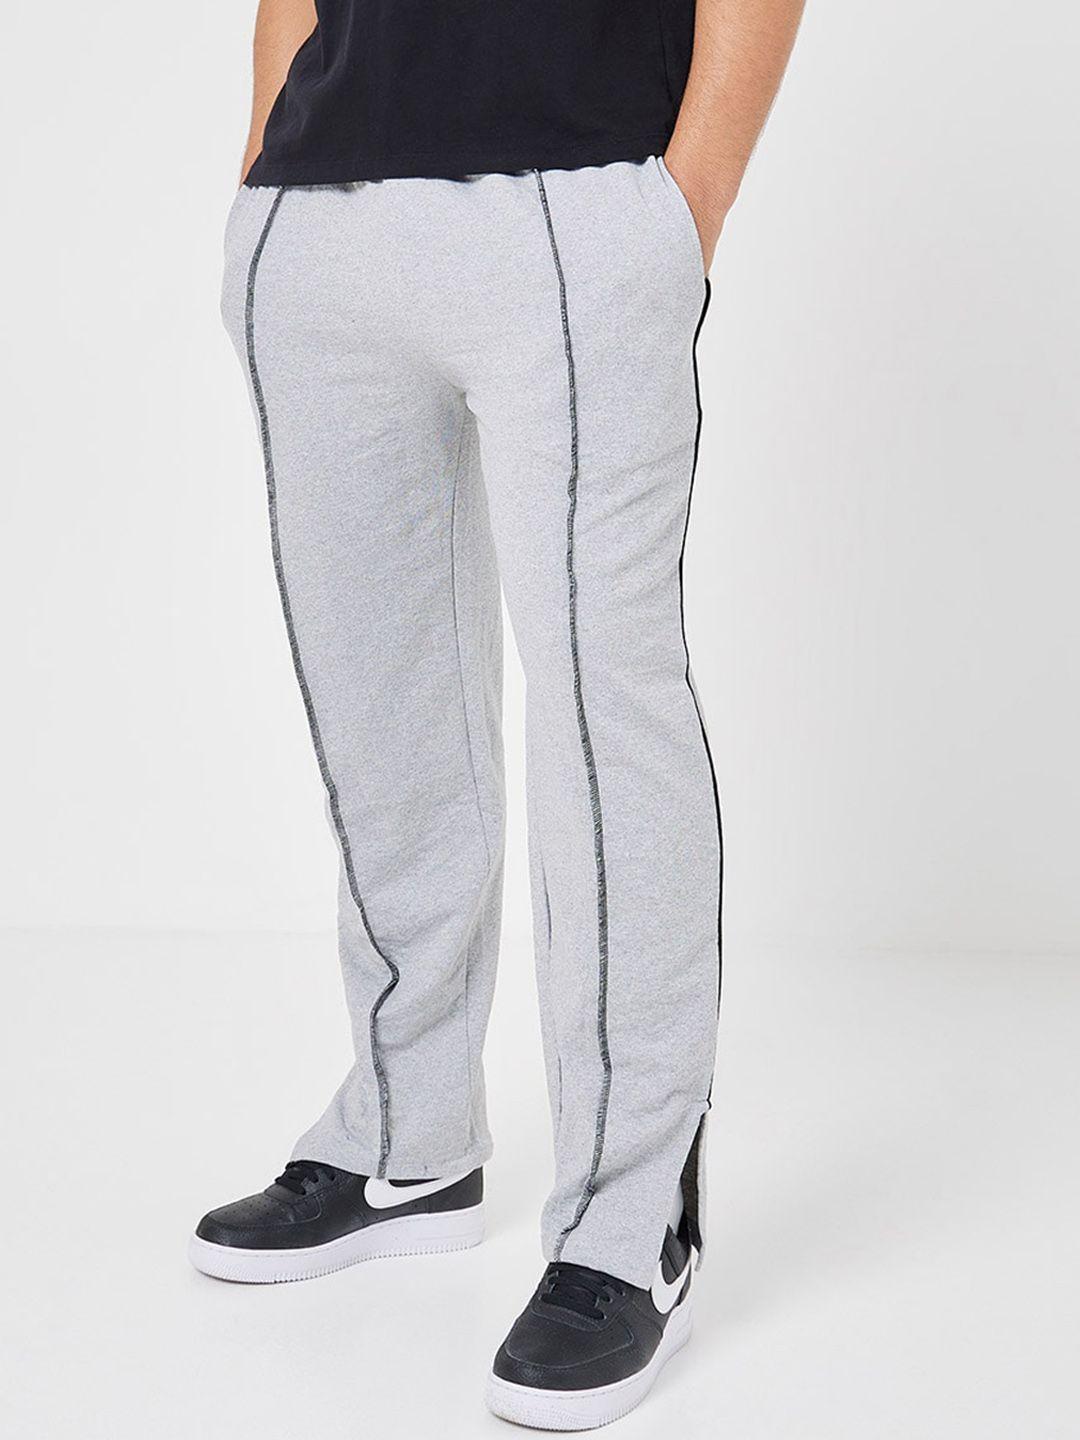 styli-men-grey-relaxed-fit-pintuck-&-front-slit-pure-cotton-track-pant